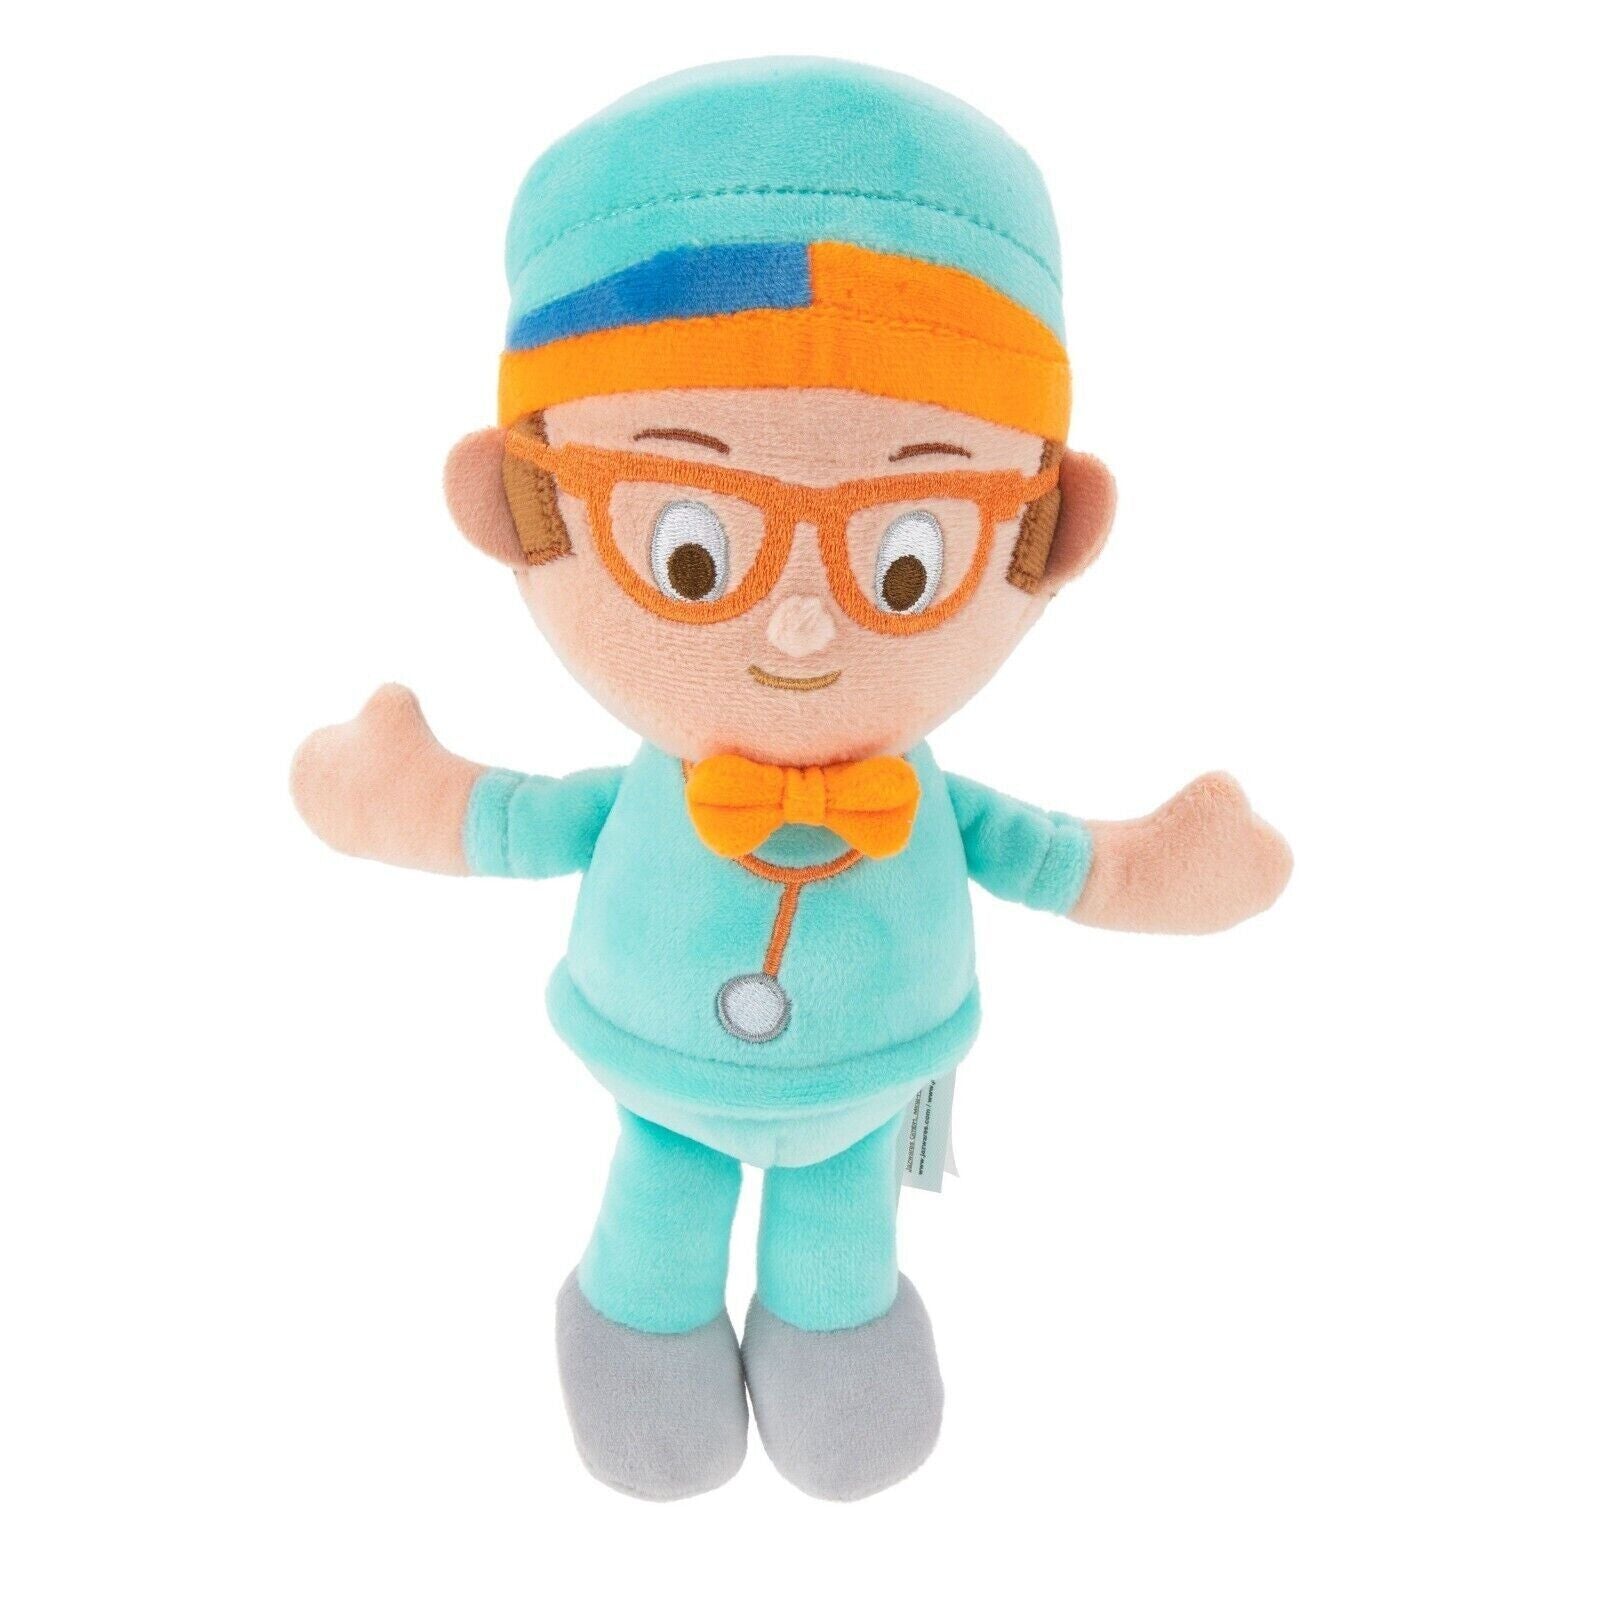 New with Tags Doctor Blippi Plush Toy - Perfect Gift for Kids